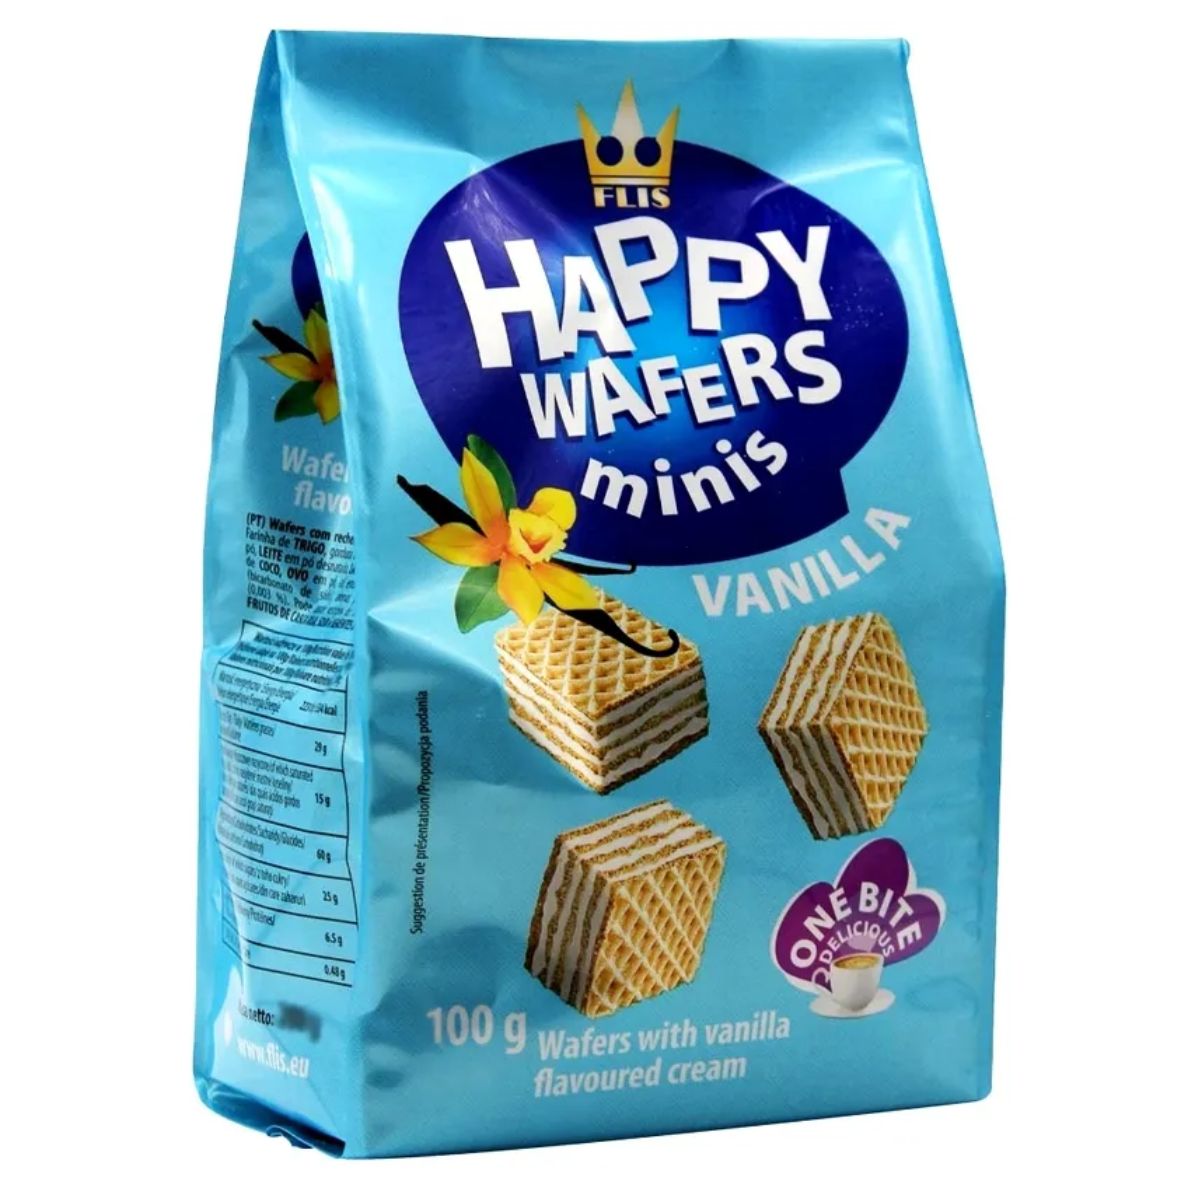 A bag of Happy Wafers - Minis with Vanilla - 200g on a white background.